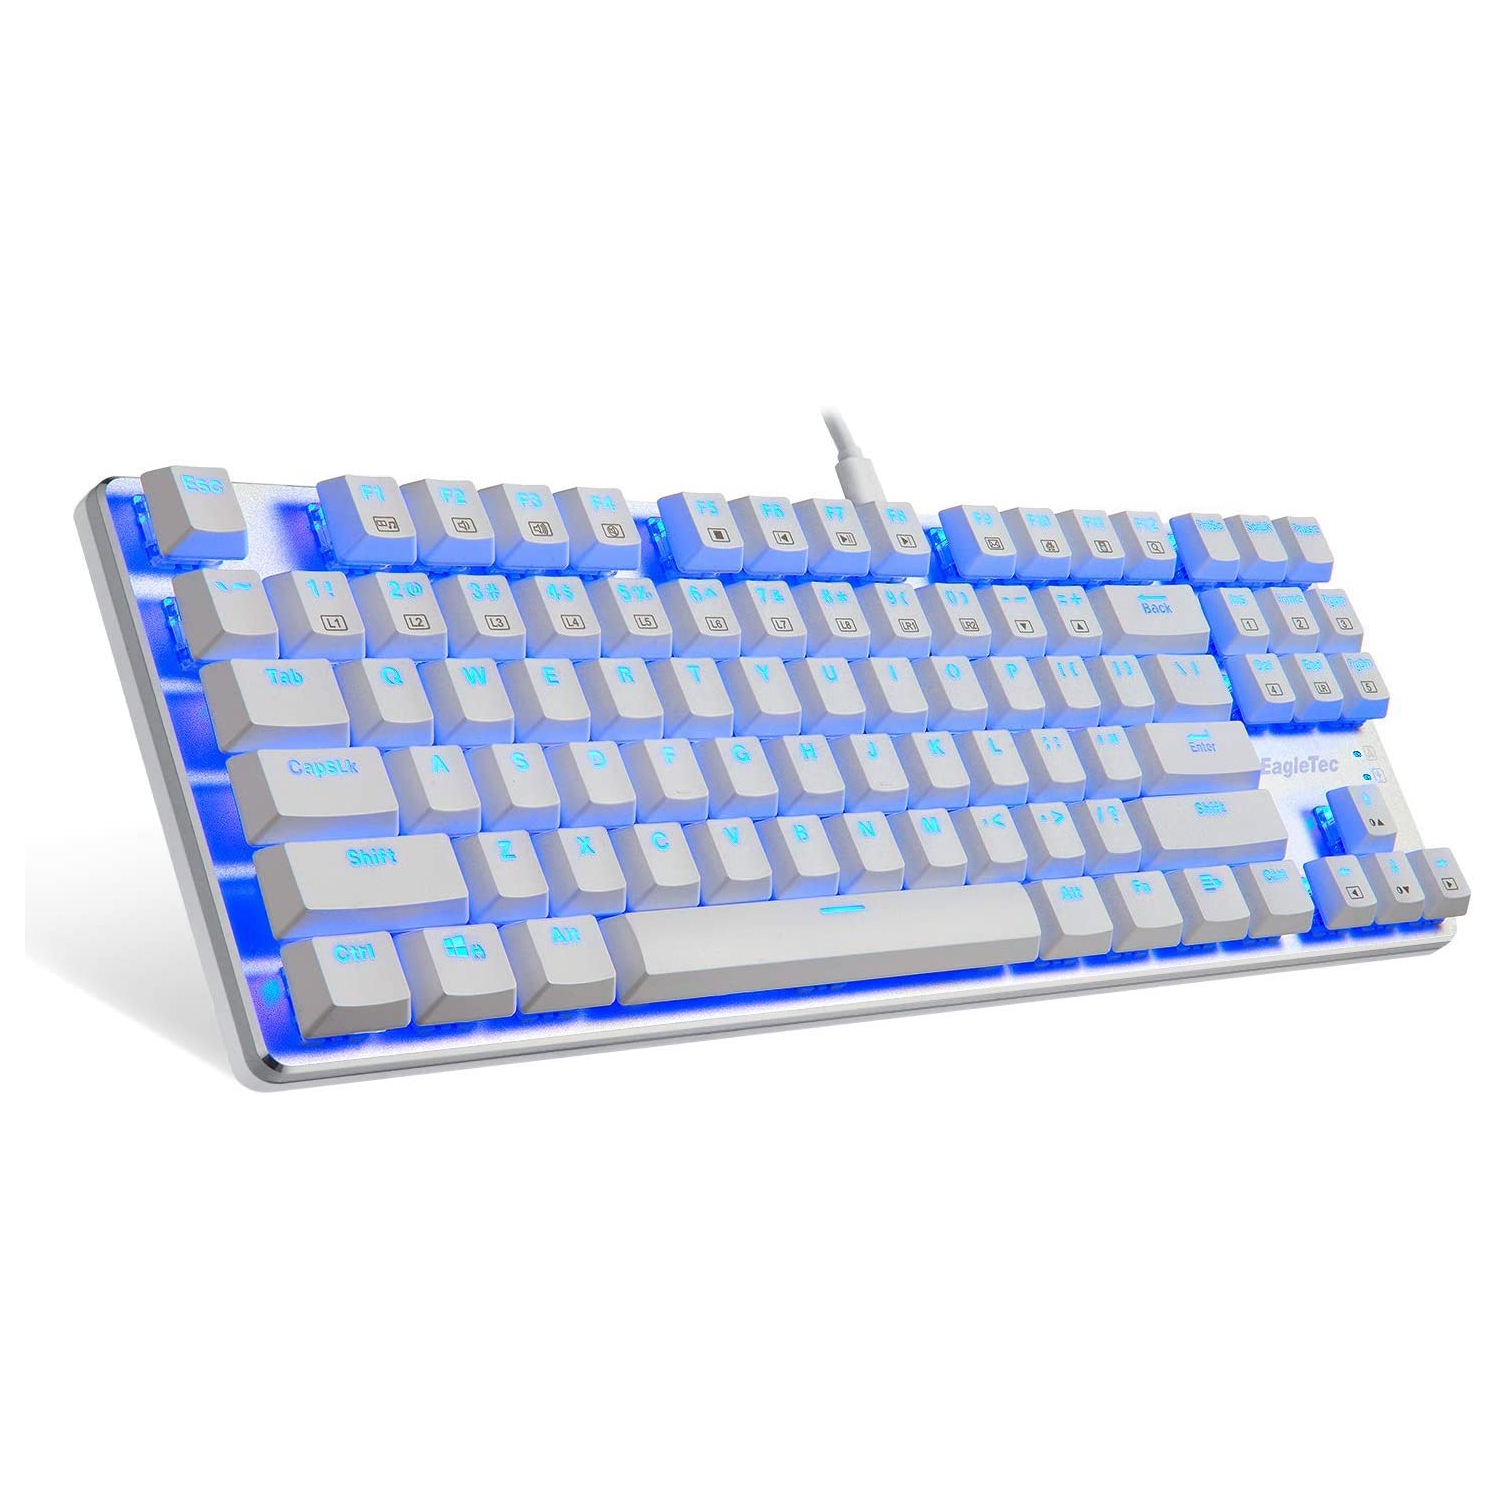 KG061-BR Blue LED Backlit Mechanical Gaming Keyboard, Low Profile 87 Key USB Keyboard with Quiet Cherry Brown